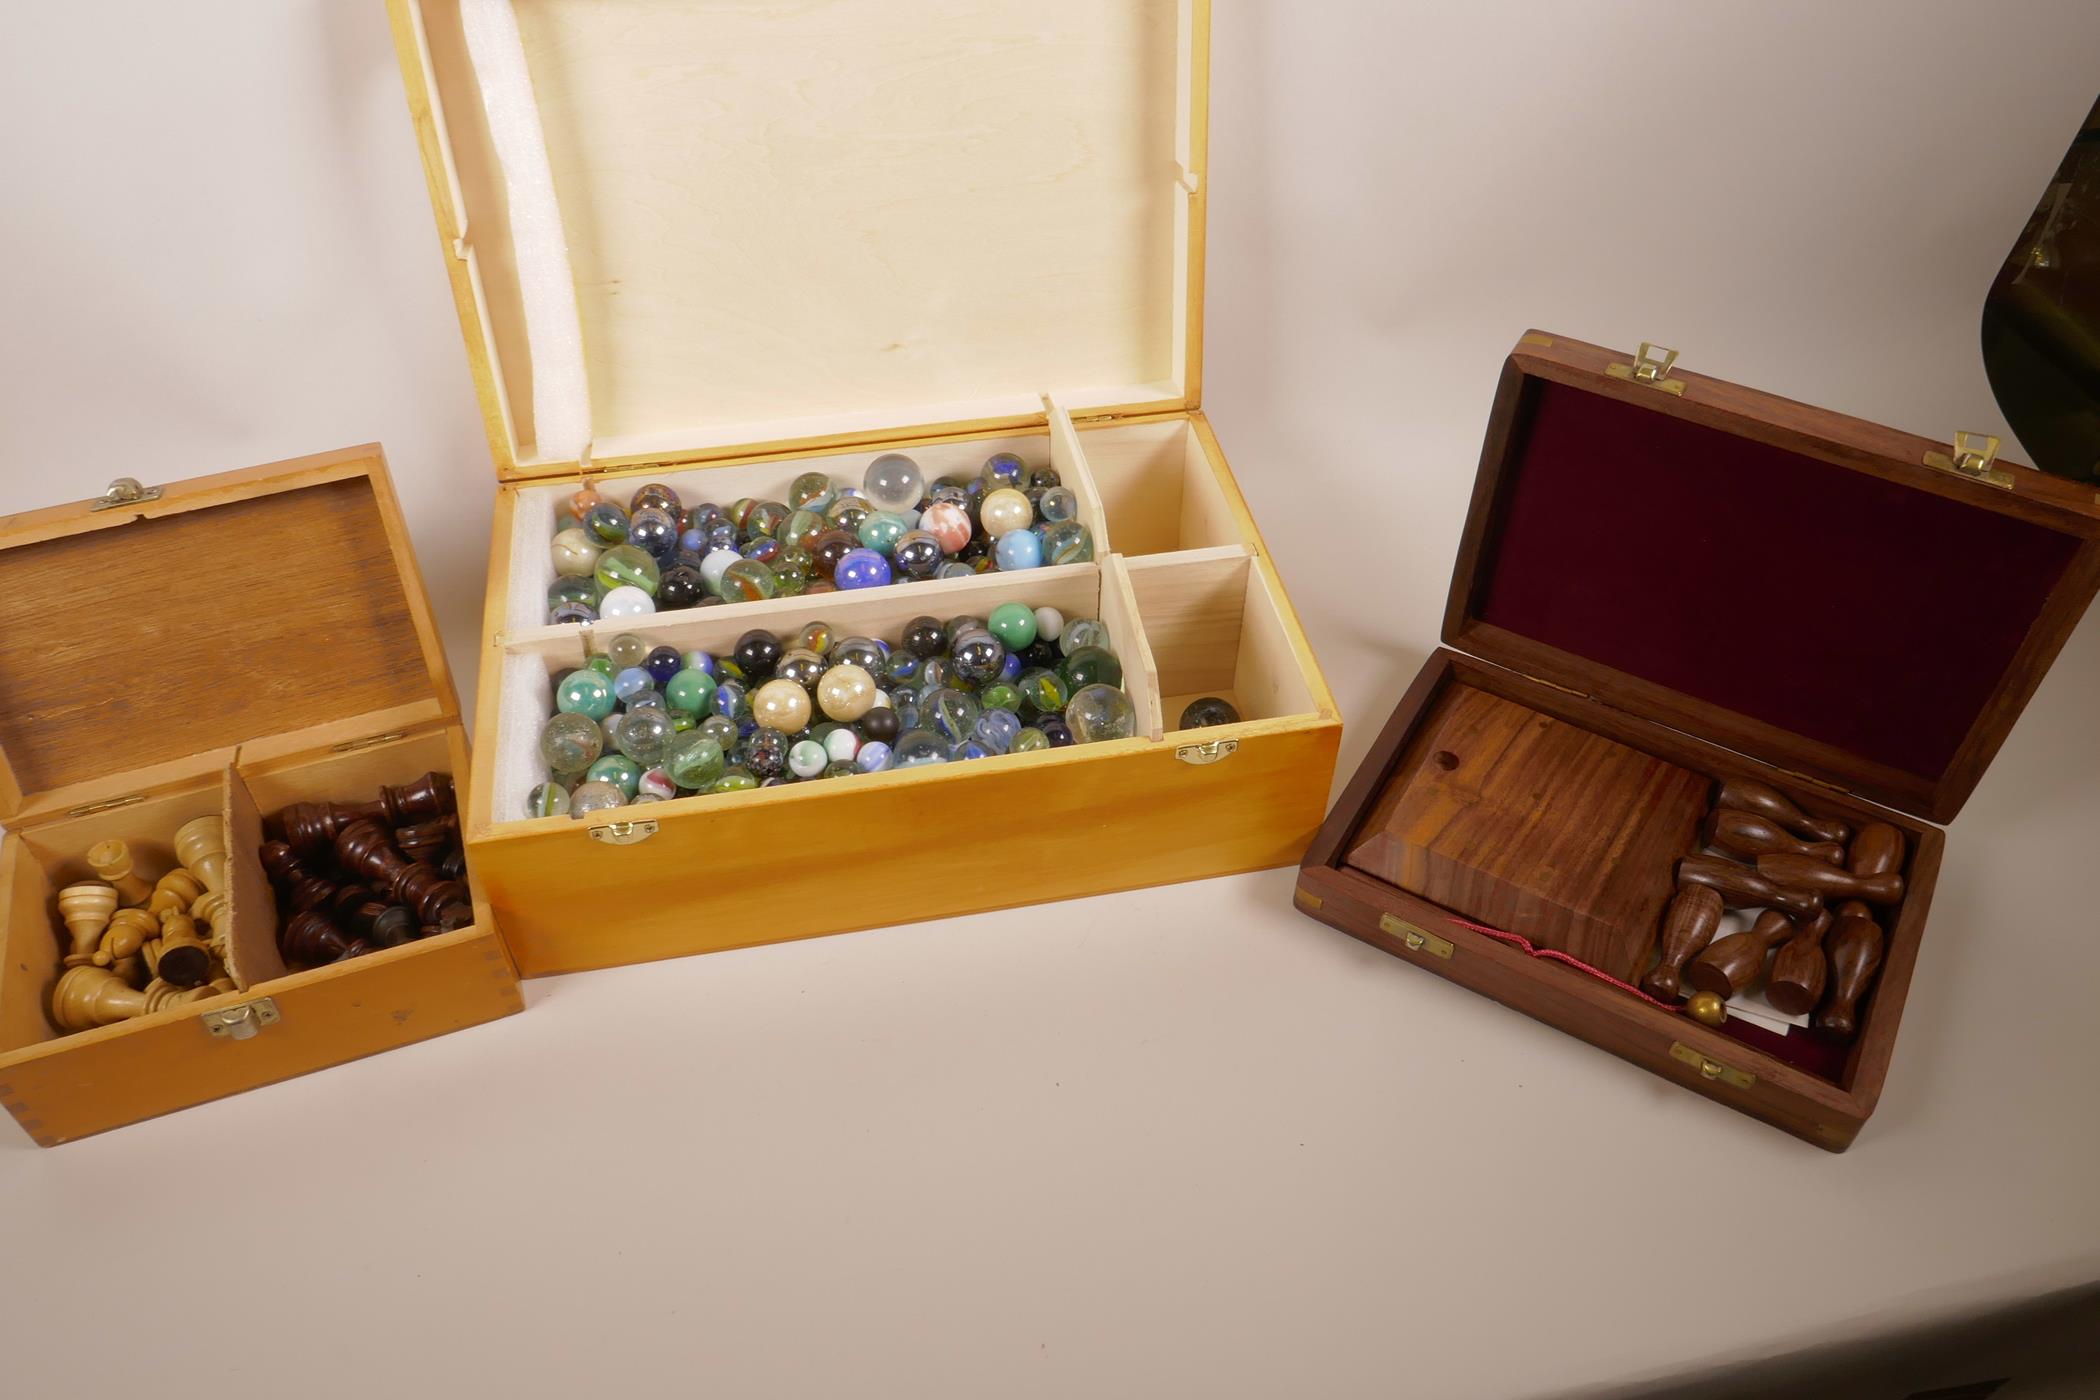 A box of vintage glass marbles together with a set of matched chess pieces and a table skittles game